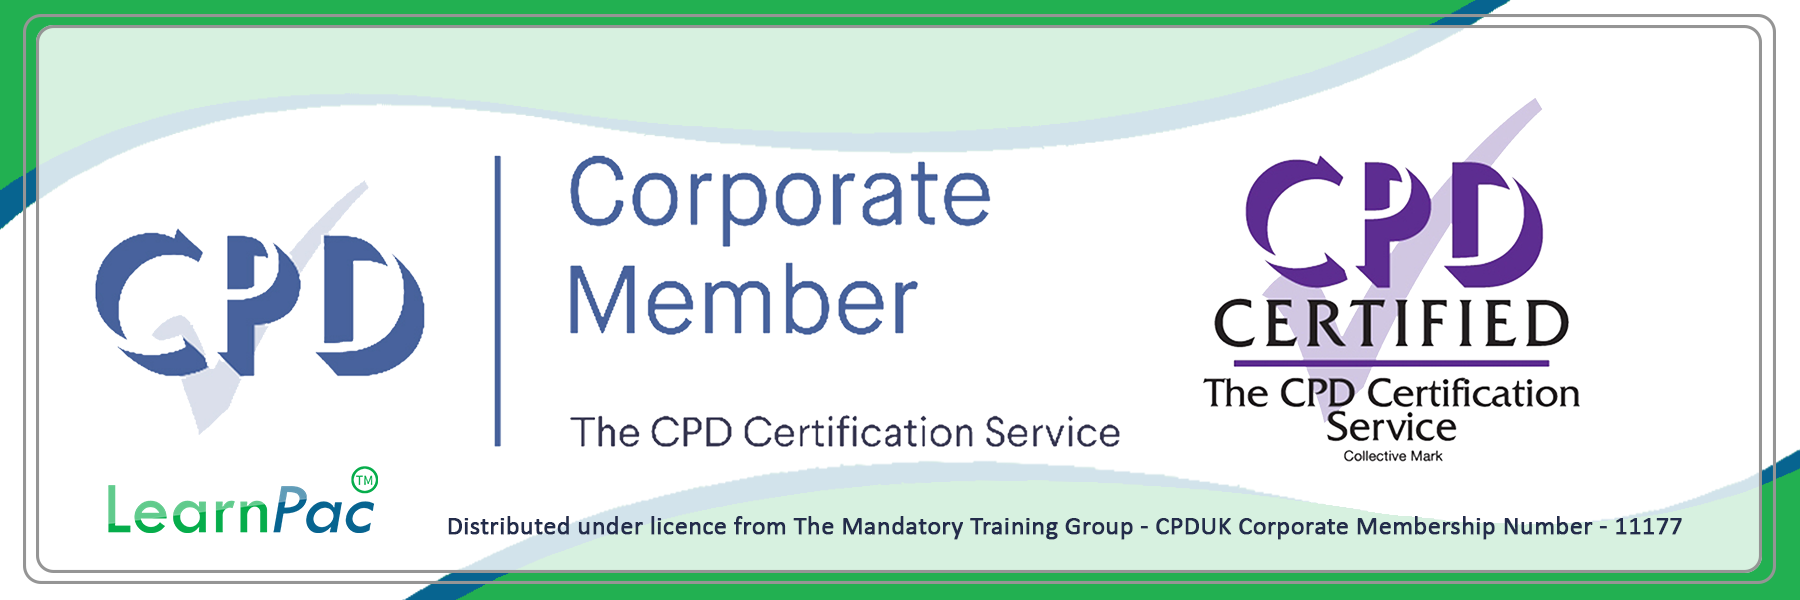 Equality and Diversity - E-Learning Courses with Certificates - CPD Certified - LearnPac Systems UK -